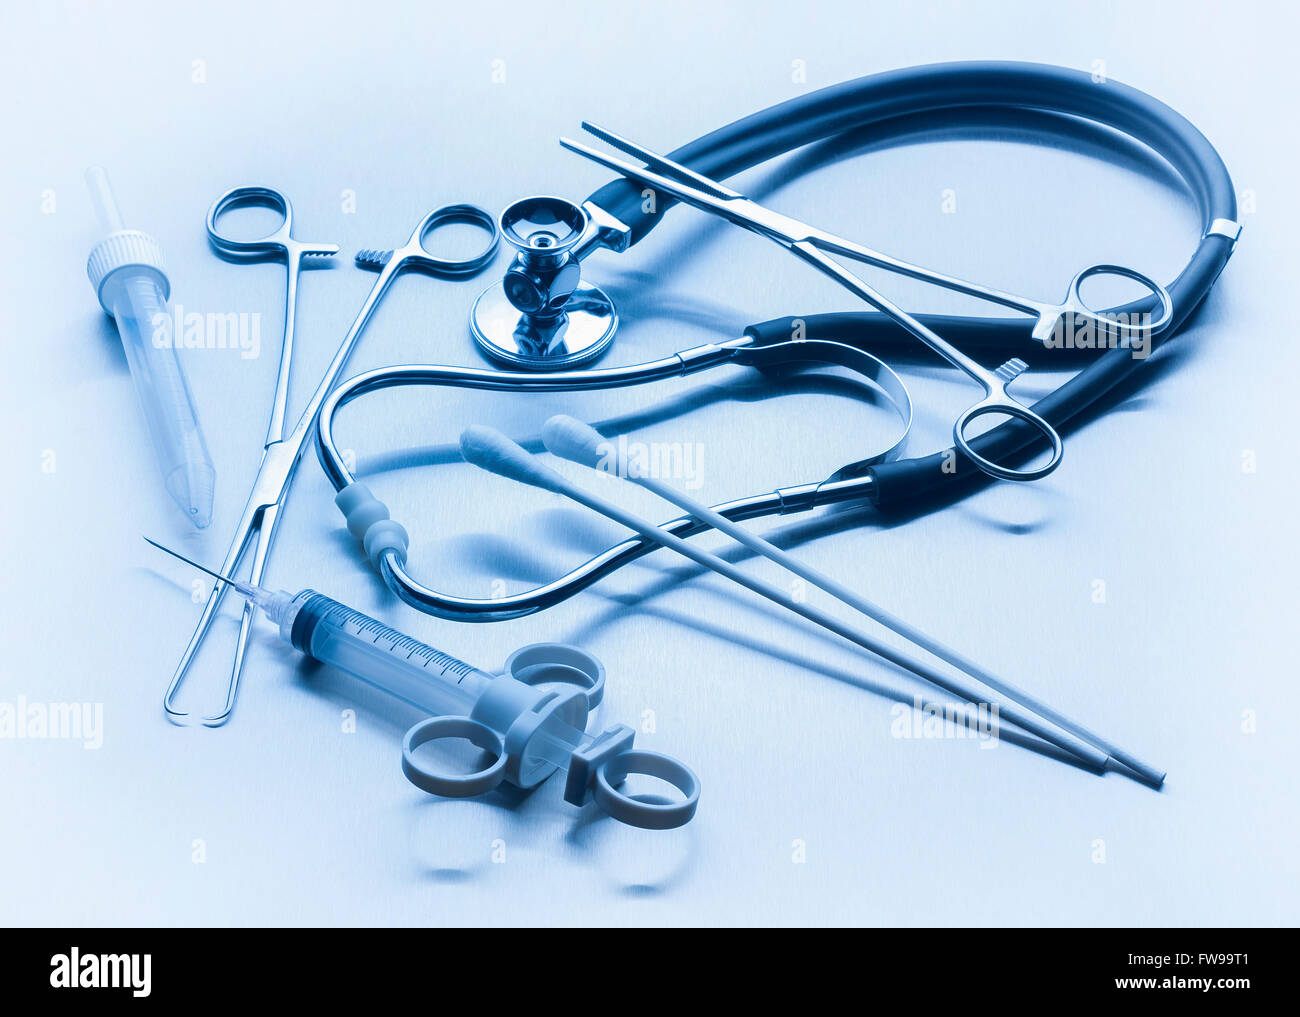 Medical instruments used by doctors in hospitals Stock Photo - Alamy